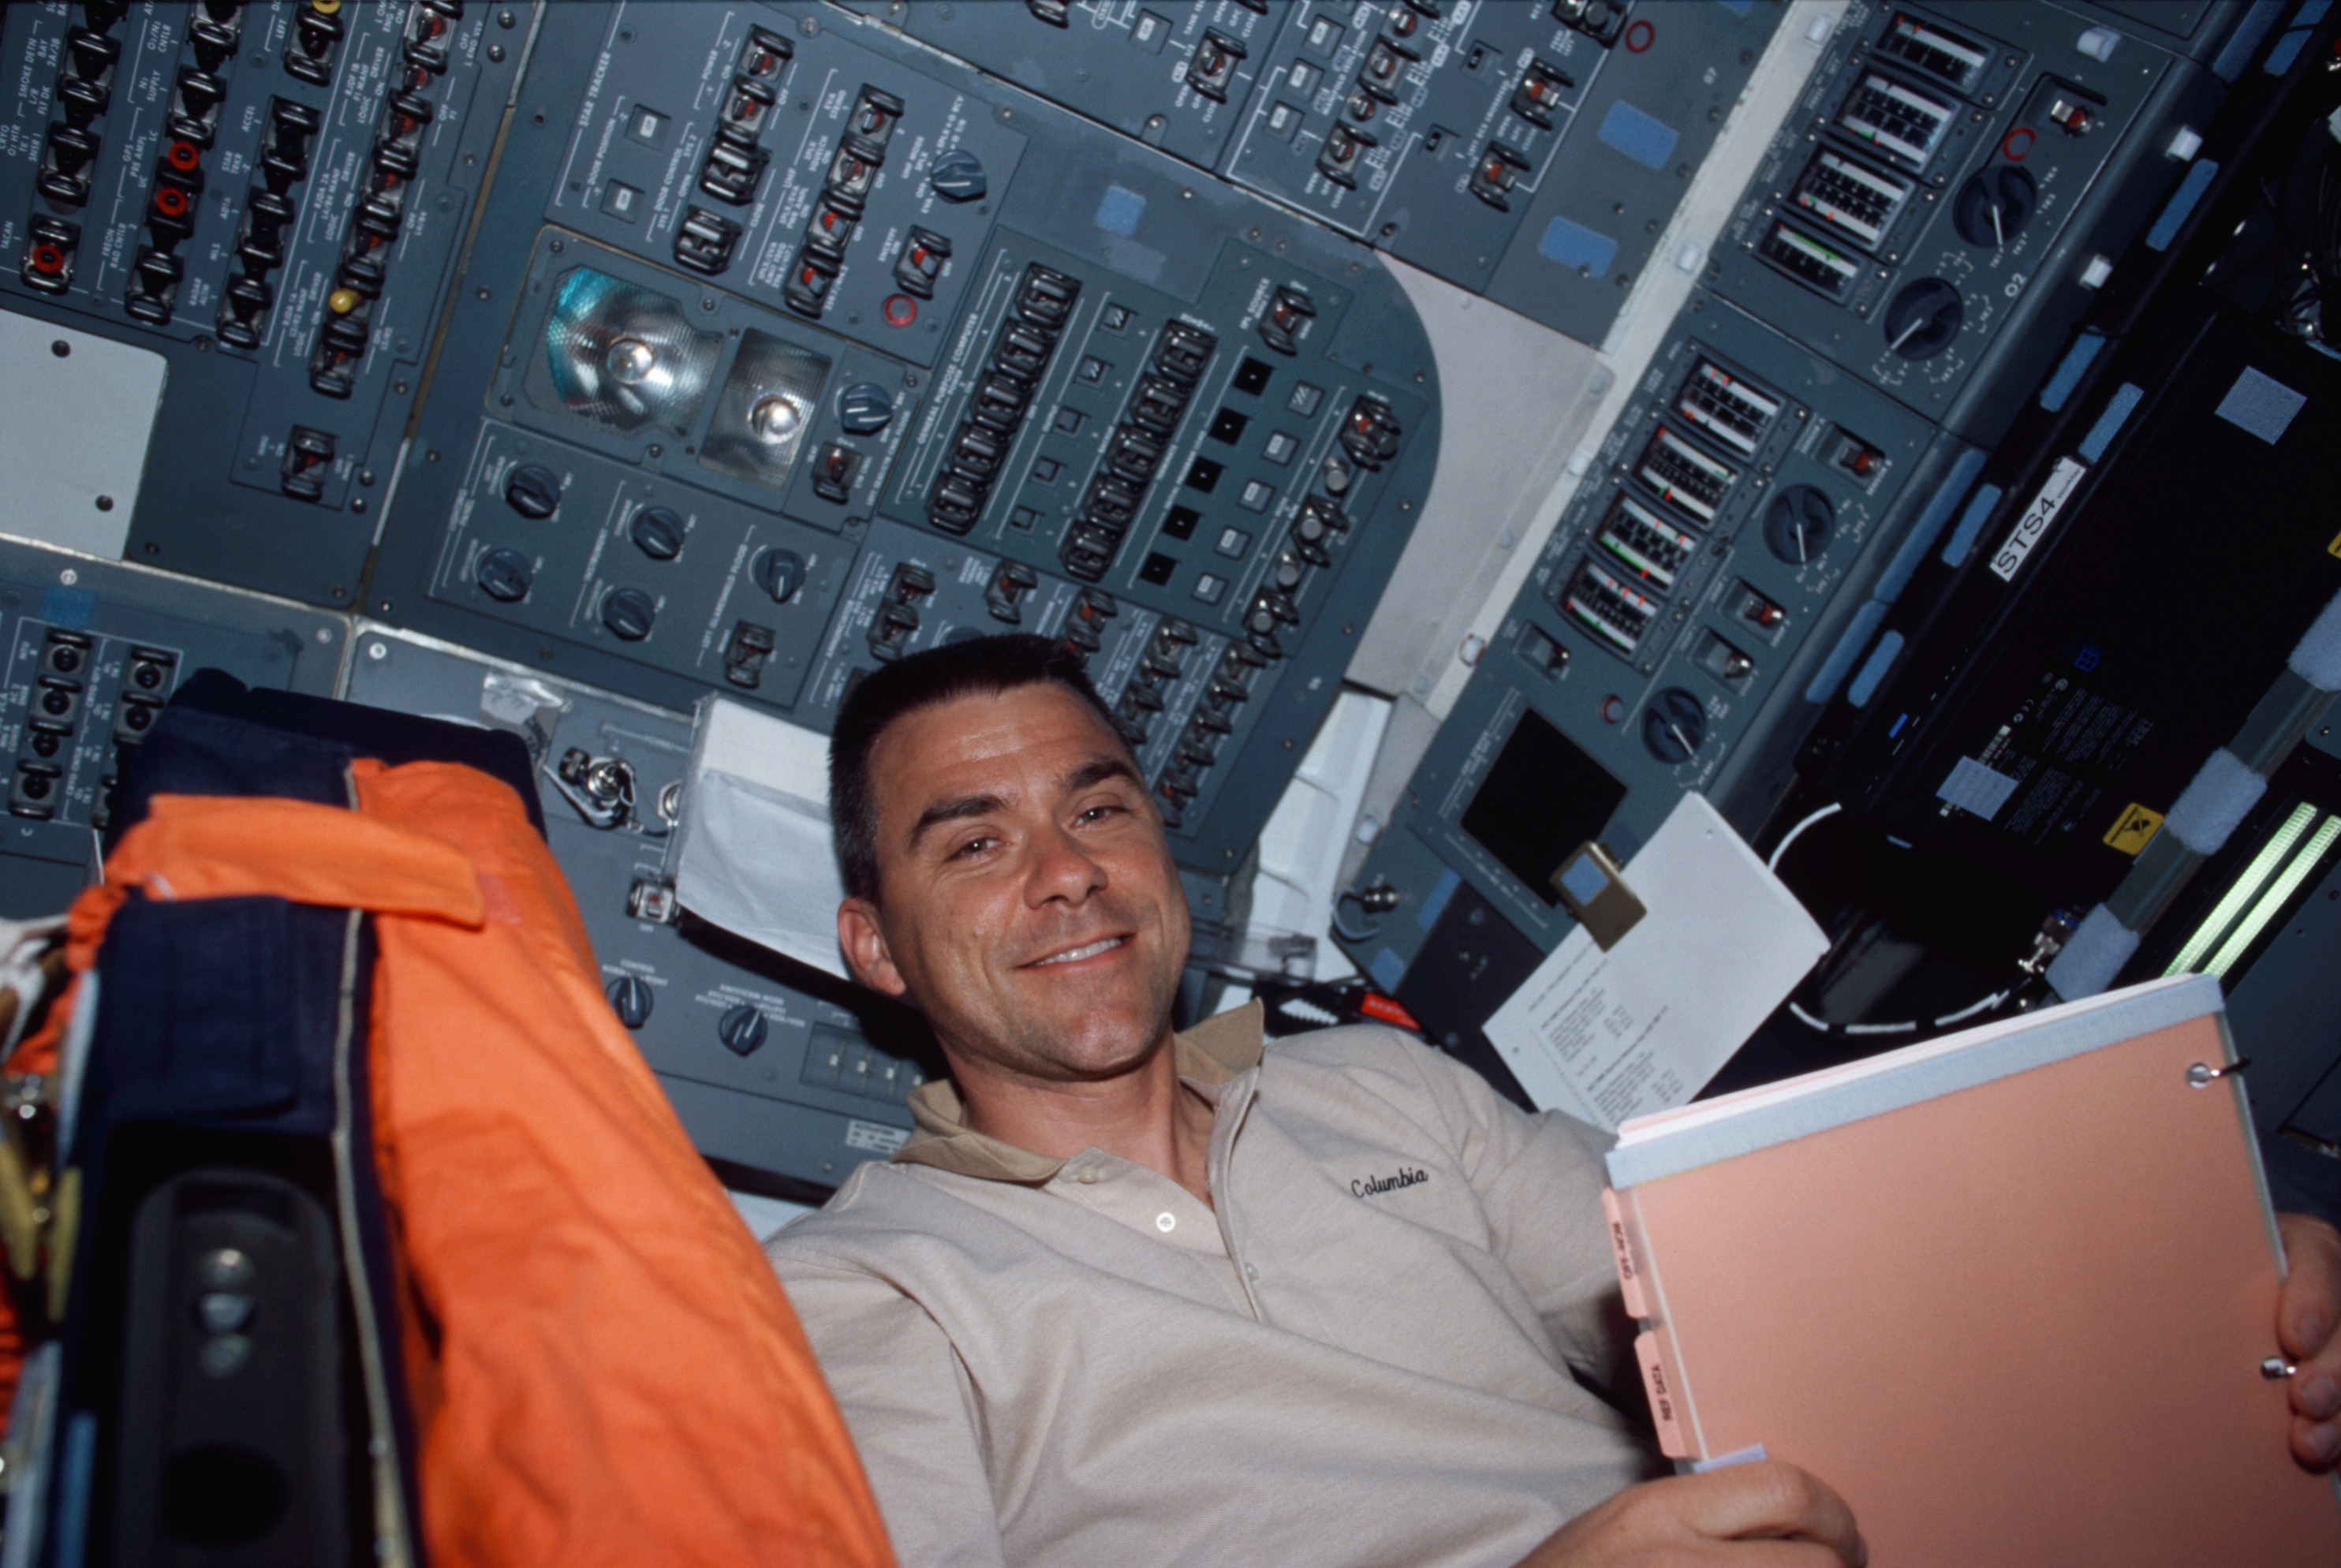 The pilot of the space shuttle poses for a photo while at the pilot's station.